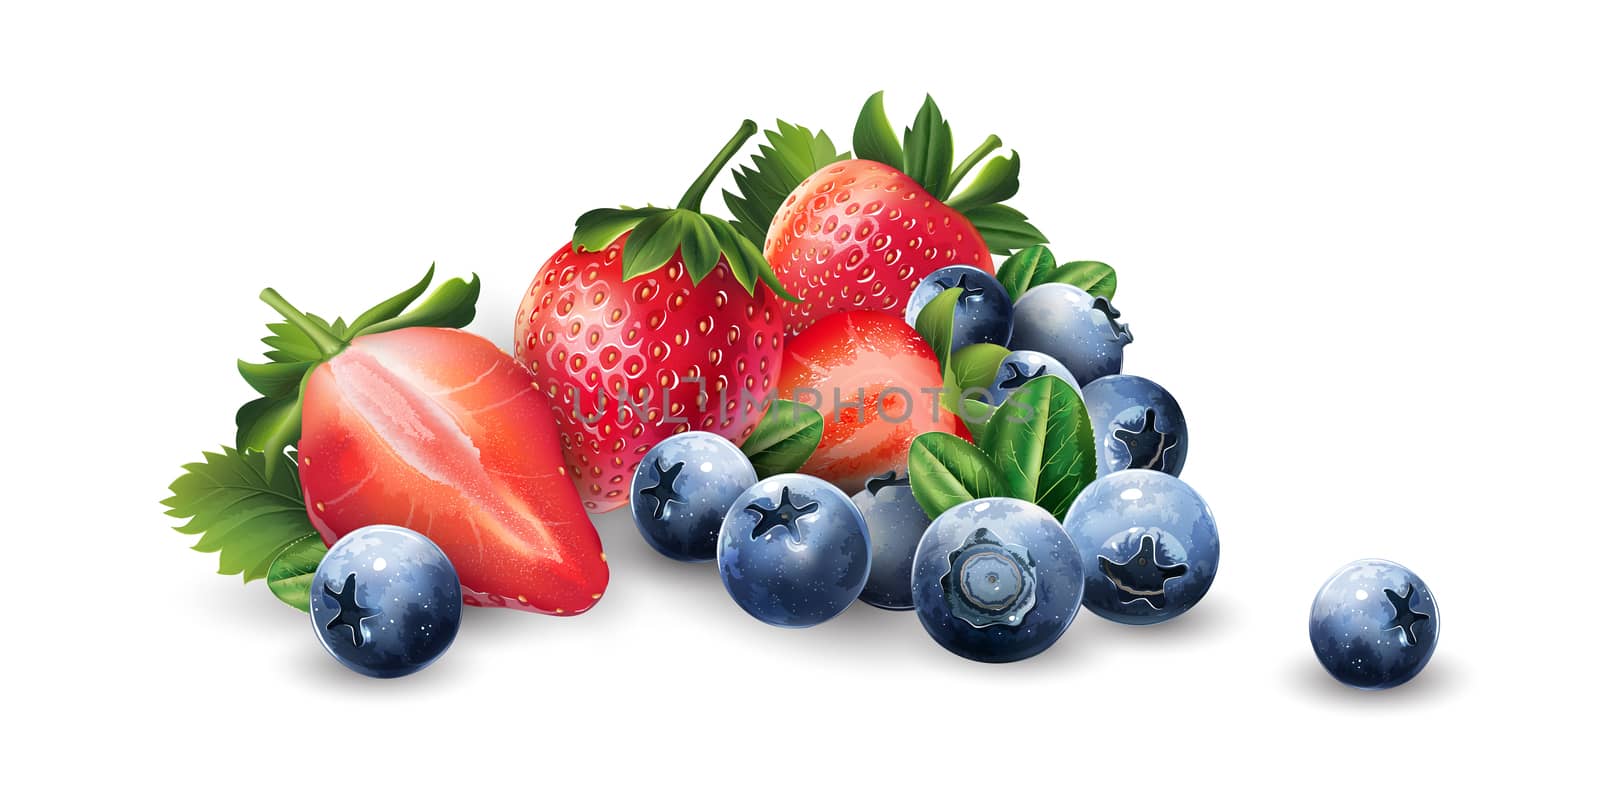 Blueberries and strawberries on a white background.